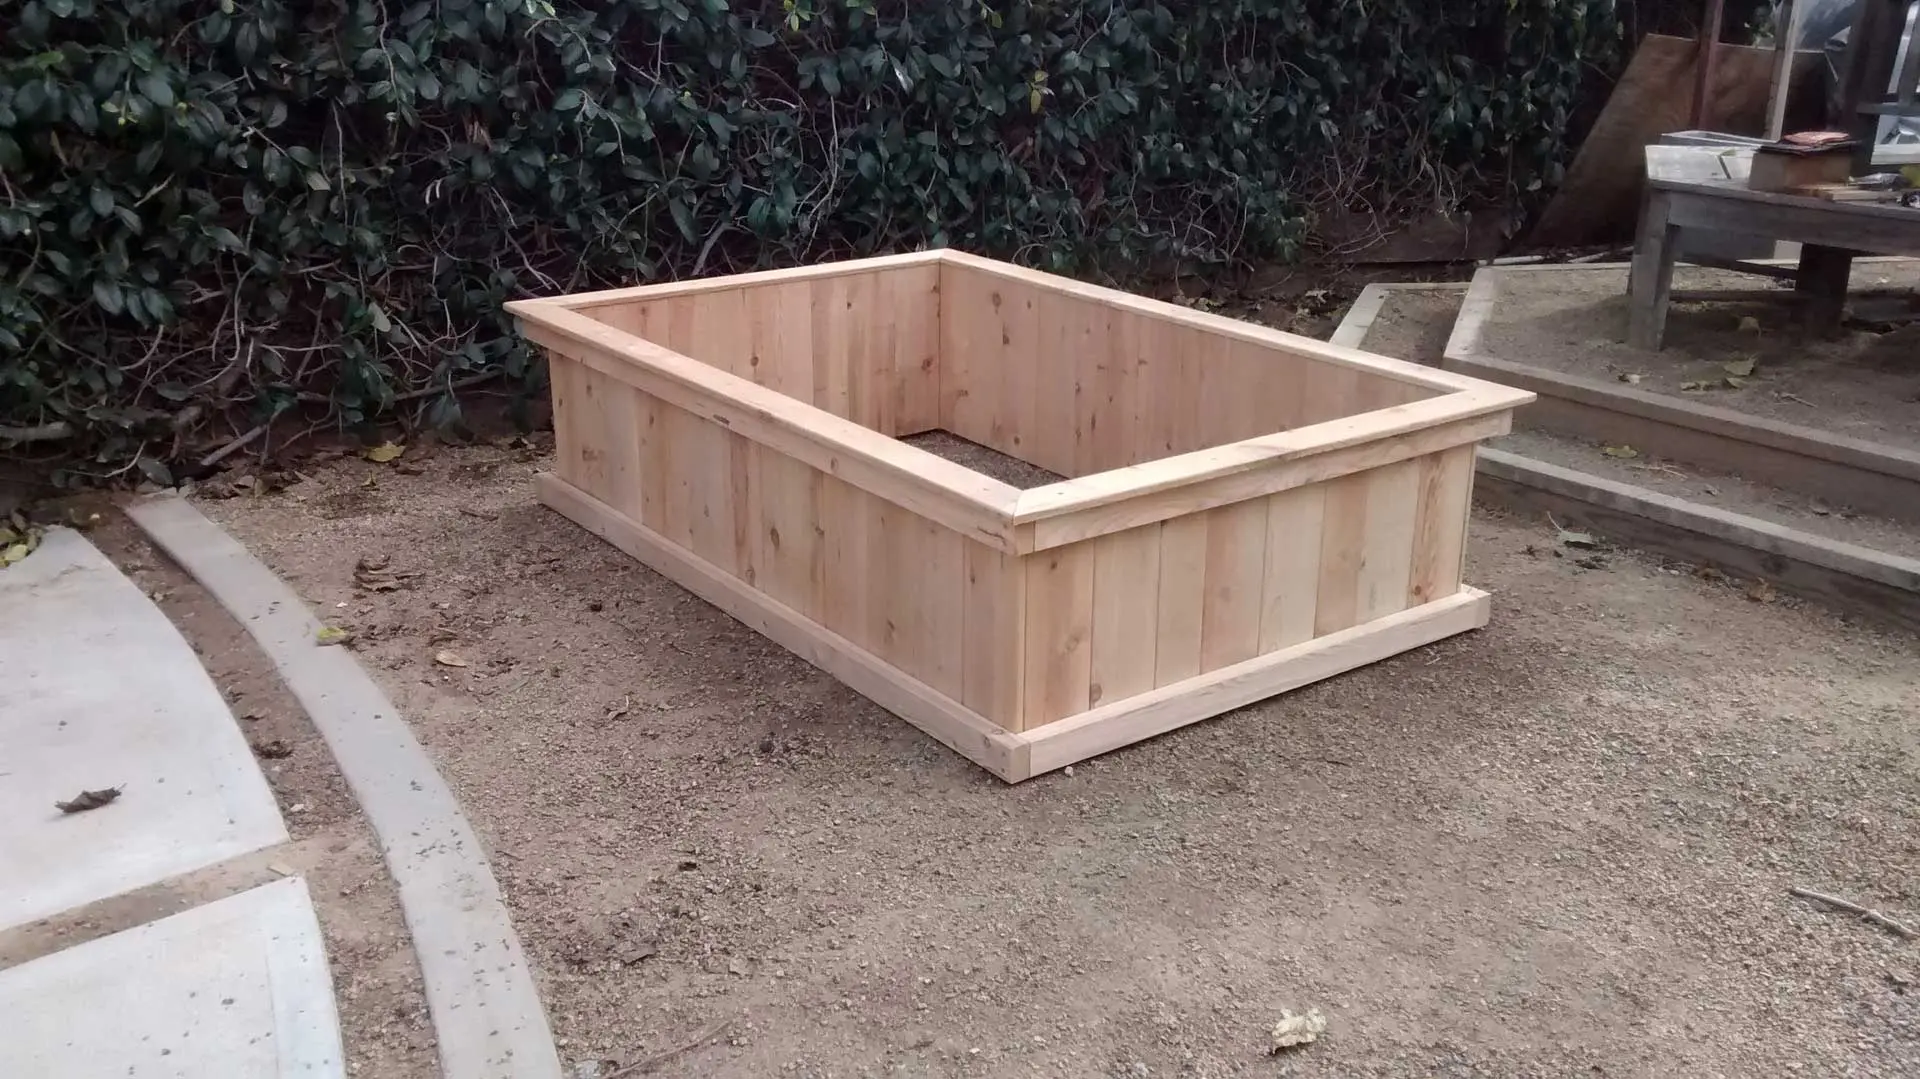 A wooden planter box sitting on the ground.